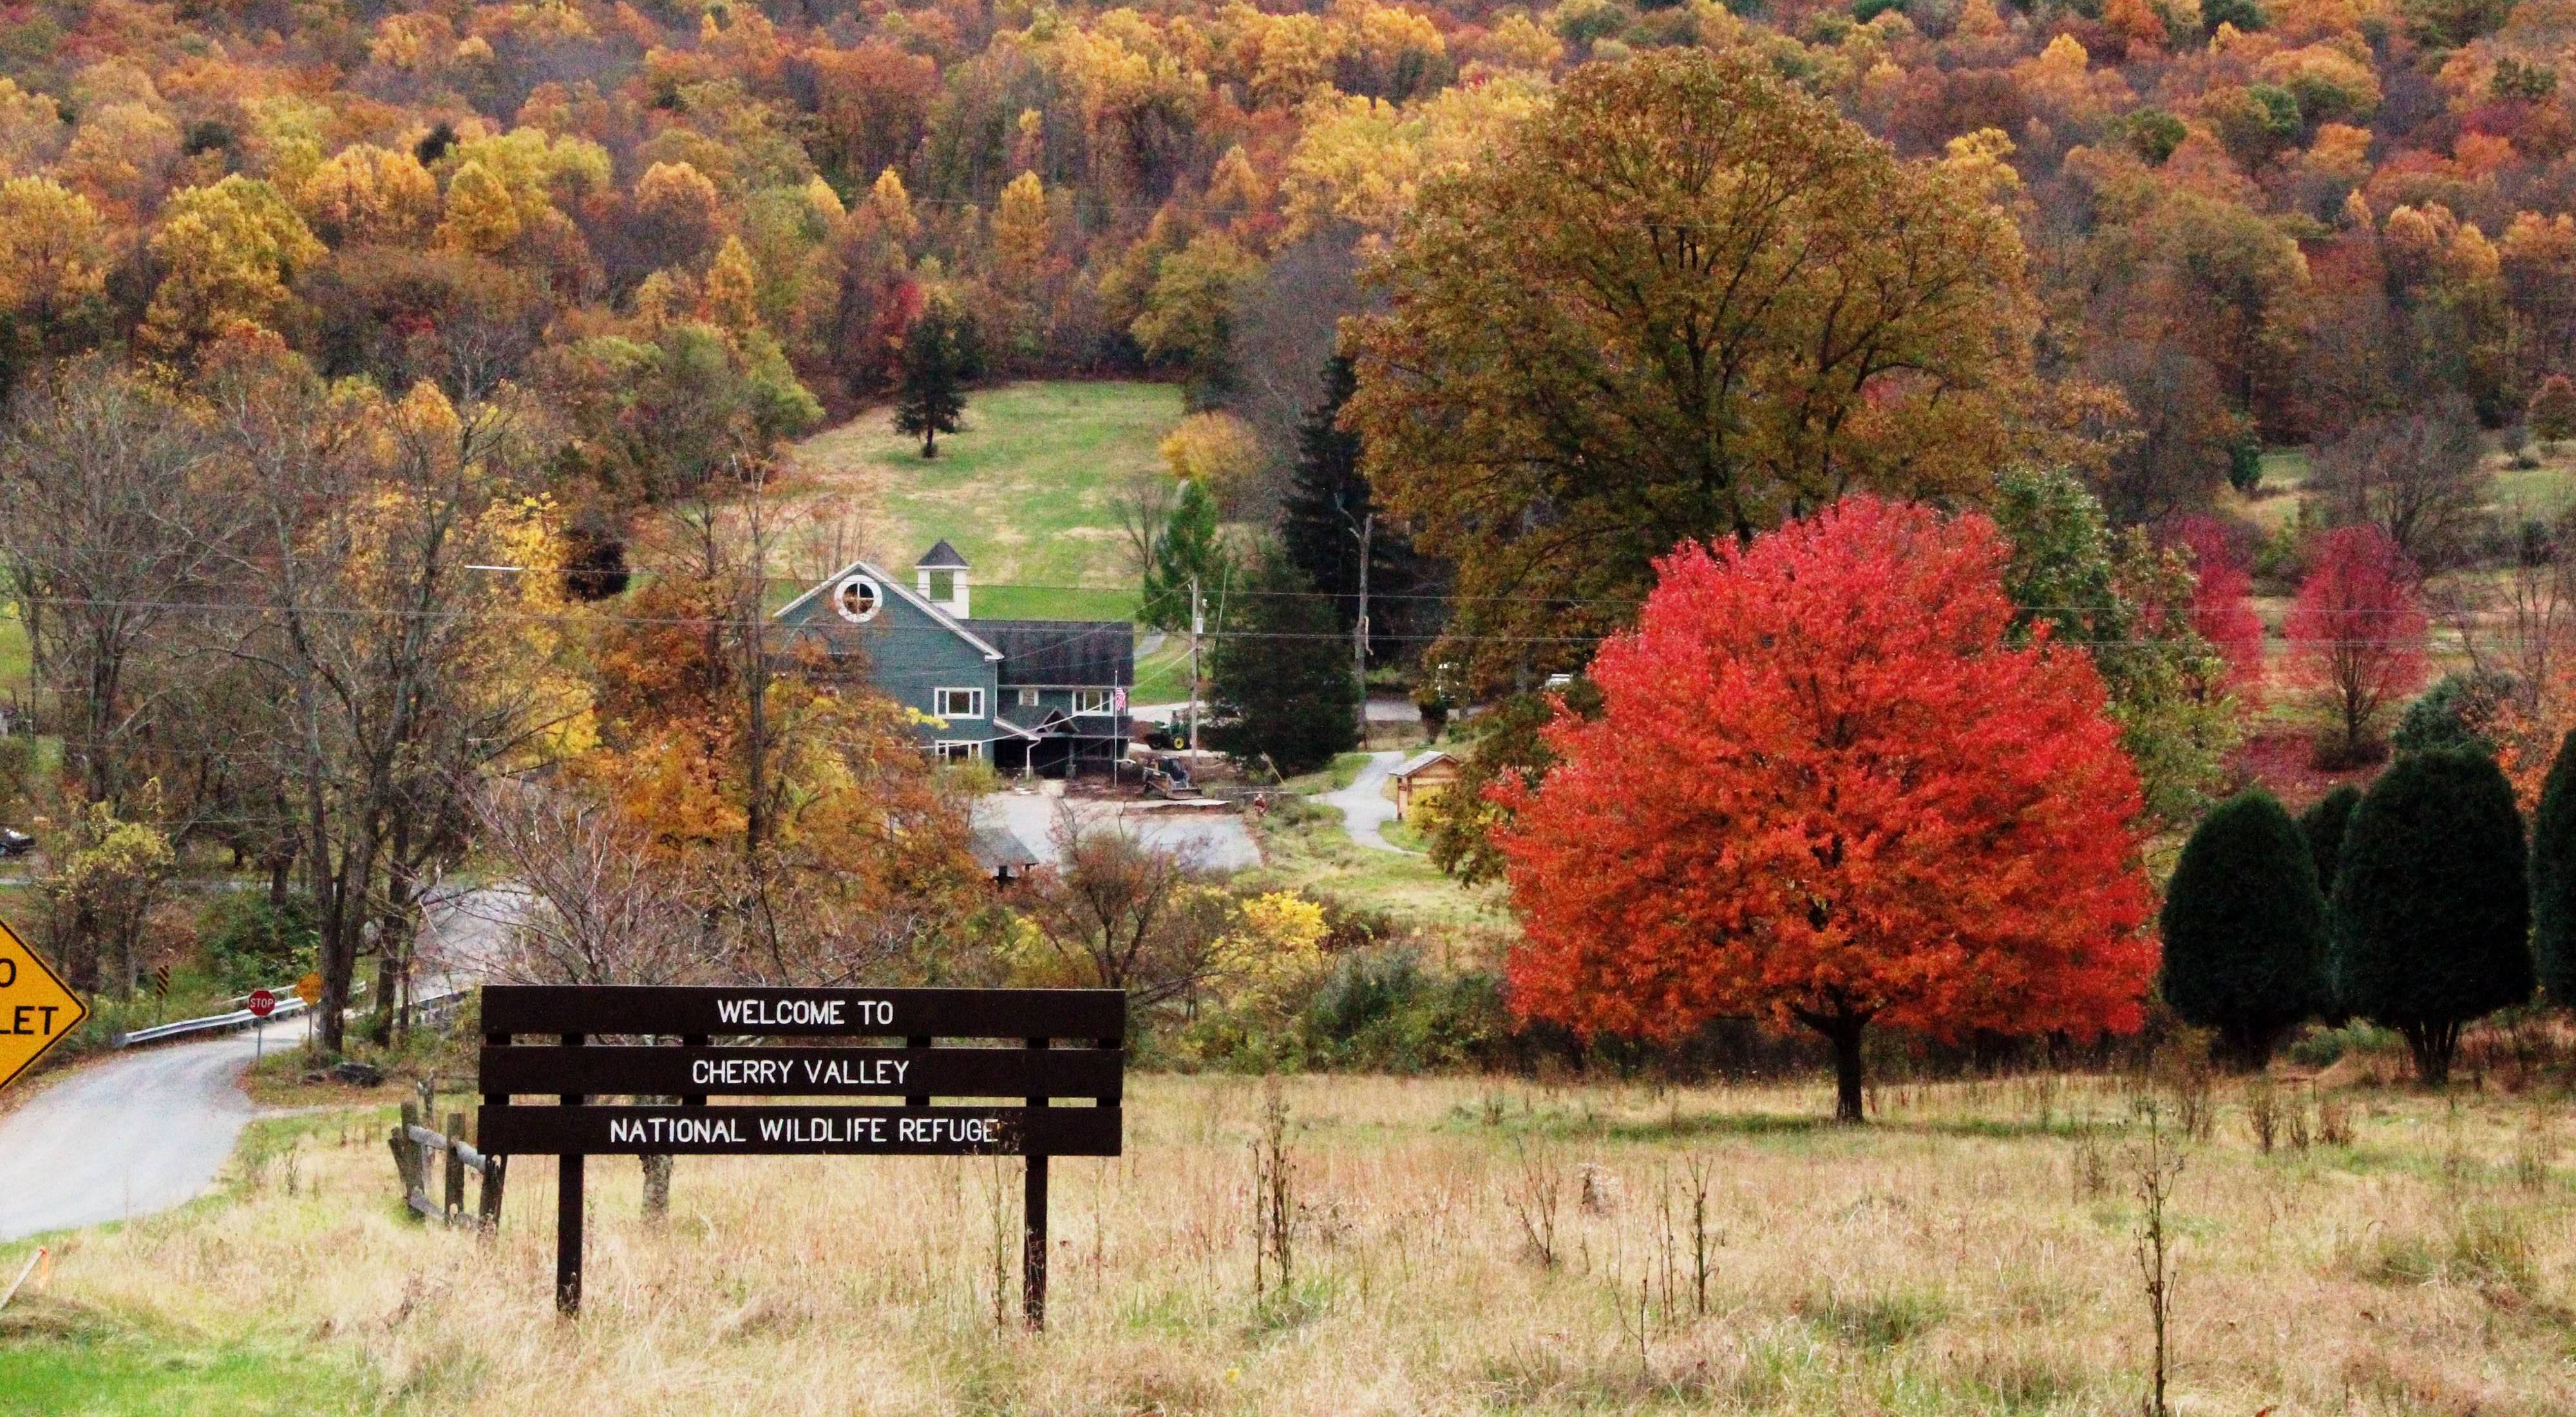 A view of a wooden sign with the words "cherry valley" sits in front of a small town with red and orange leafed trees in the distance.